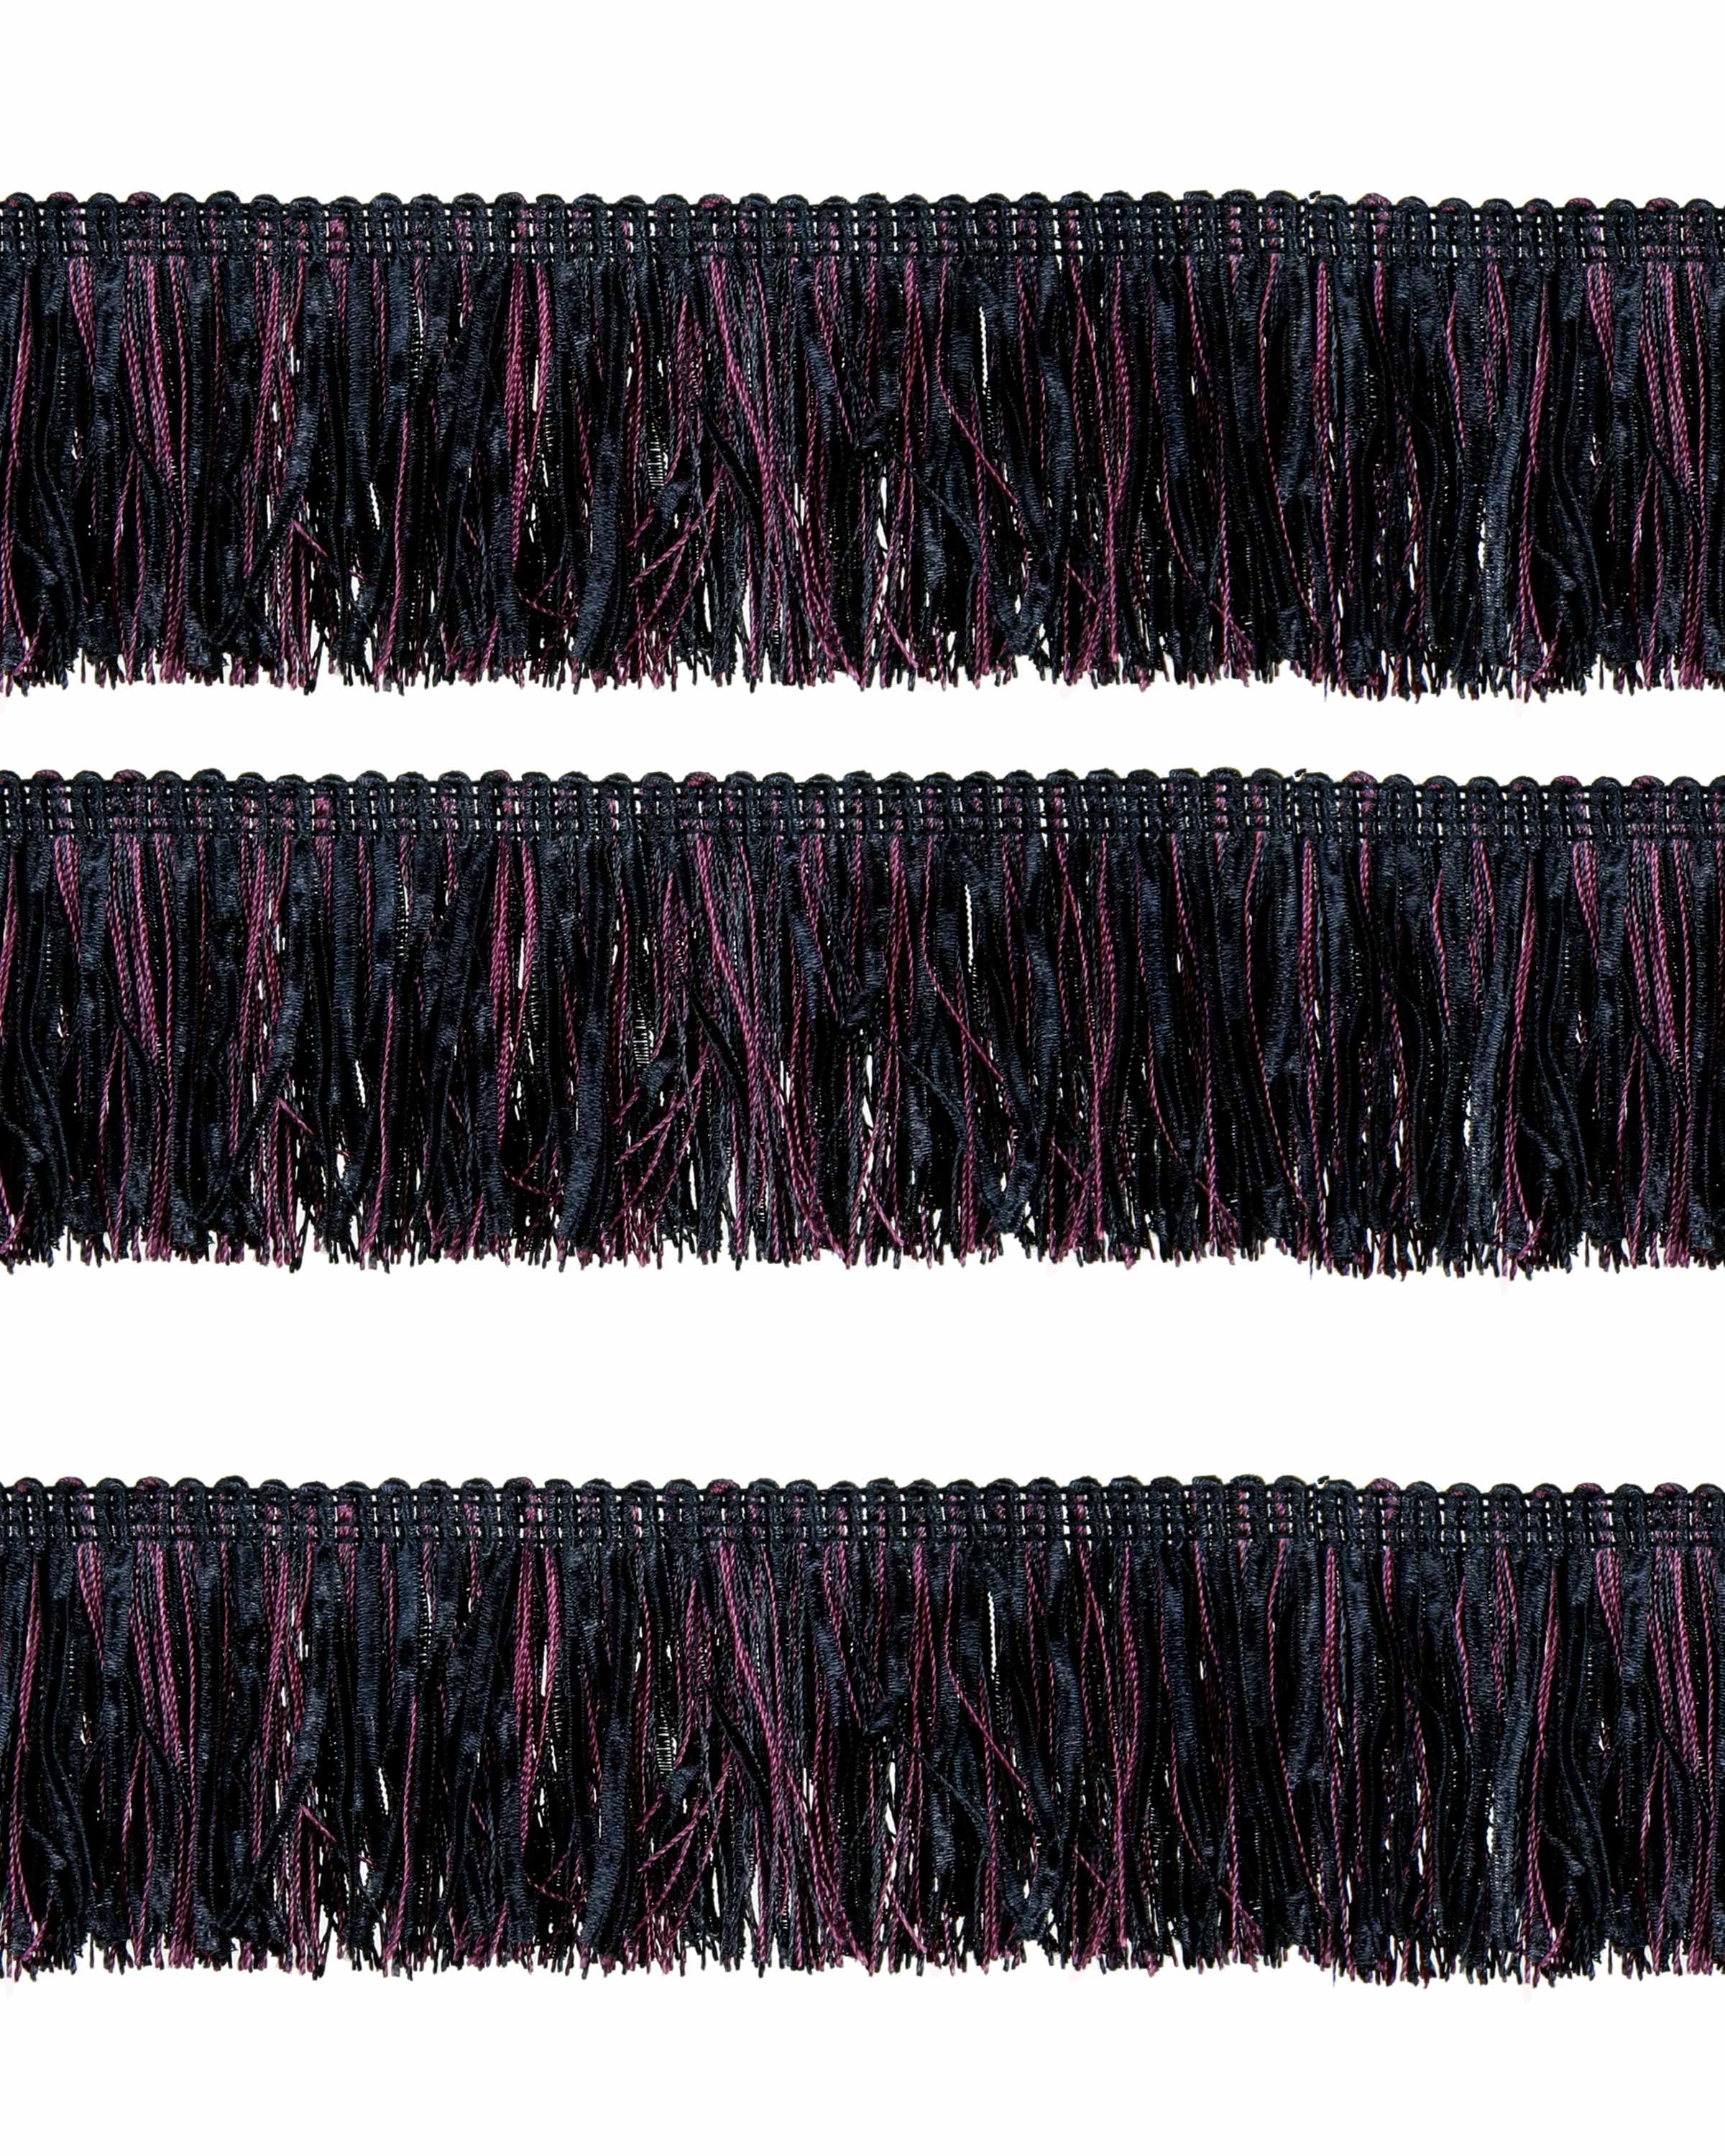 Bullion Fringe with Ribbons - Red Wine / Black 60mm Price is for 5 metres  